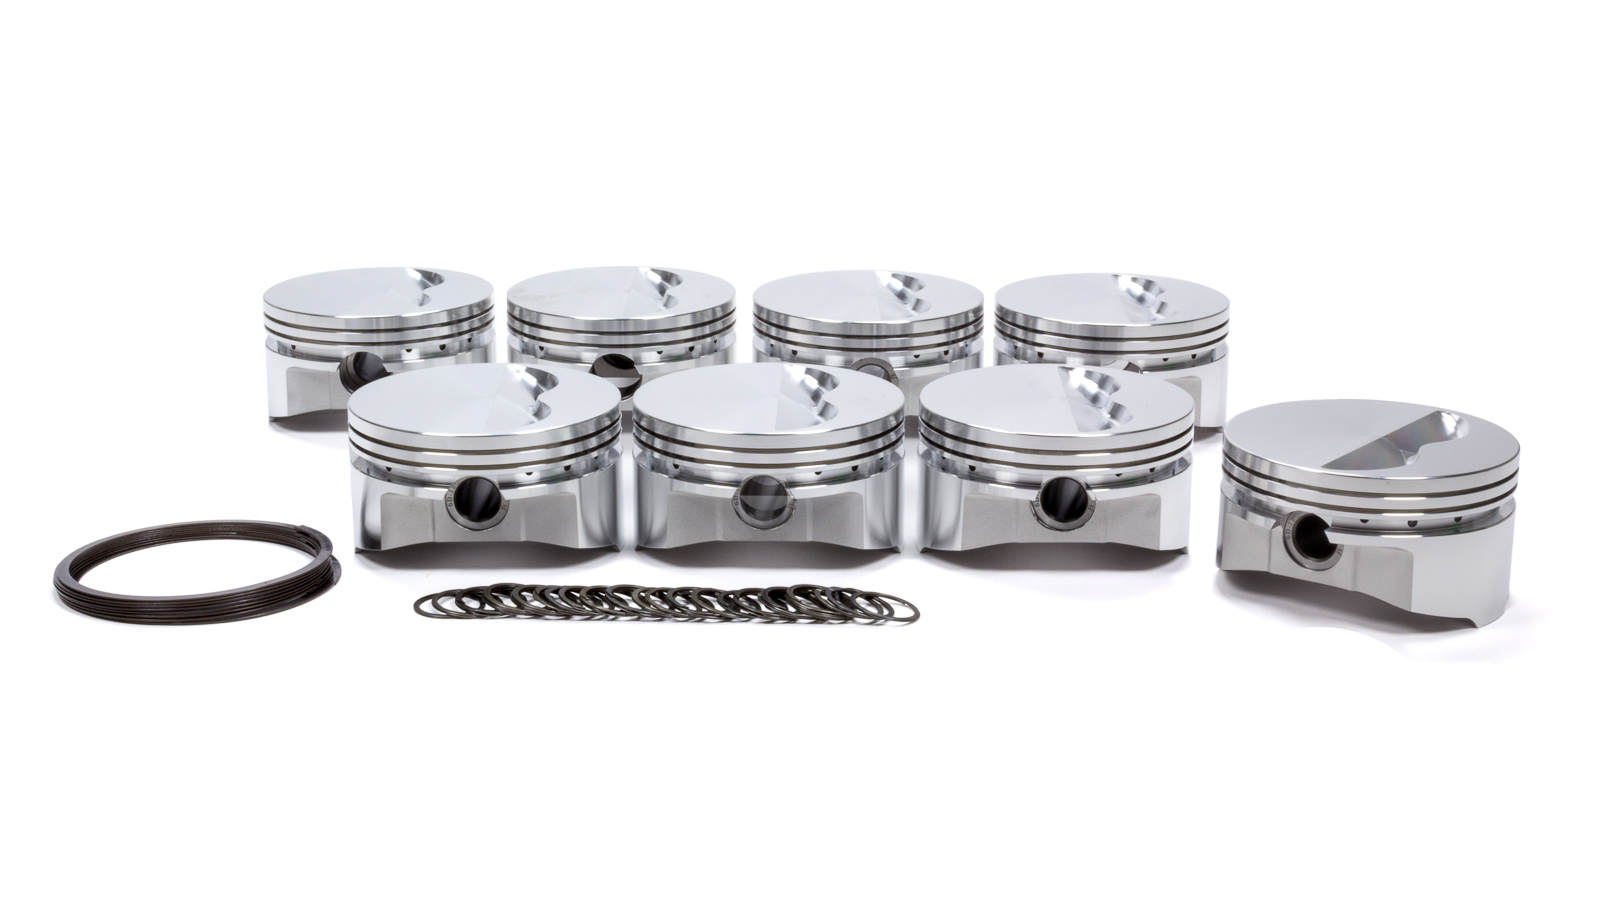 SRP Pistons 231308 Piston, 400 Flat Top, Forged, 4.125 in Bore, 1/16 x 1/16 x 3/16 in Ring Grooves, Minus 5.00 cc, Small Block Chevy, Set of 8